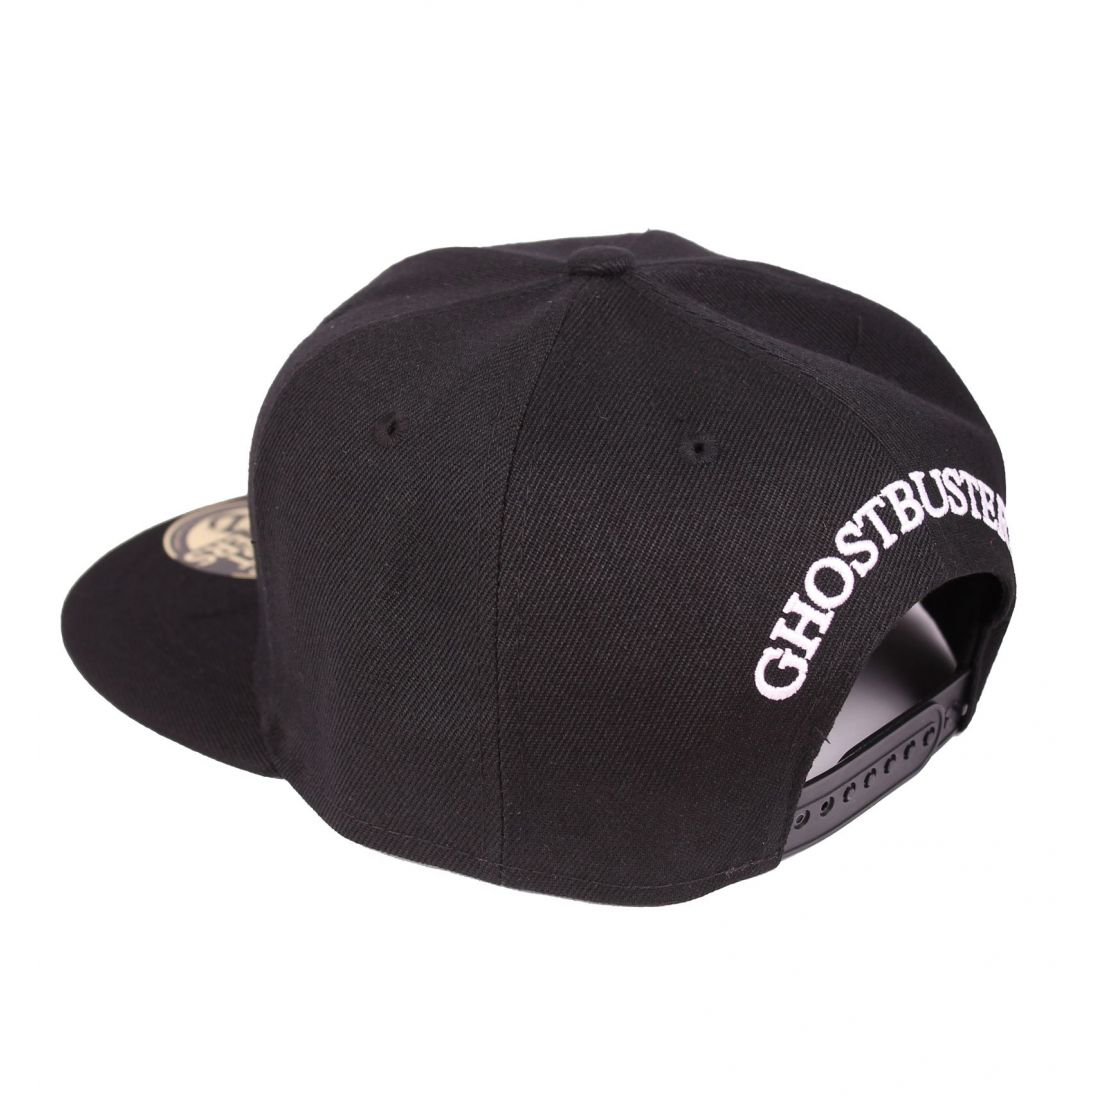 casquette-ghostbusters-logo-broderie-dos